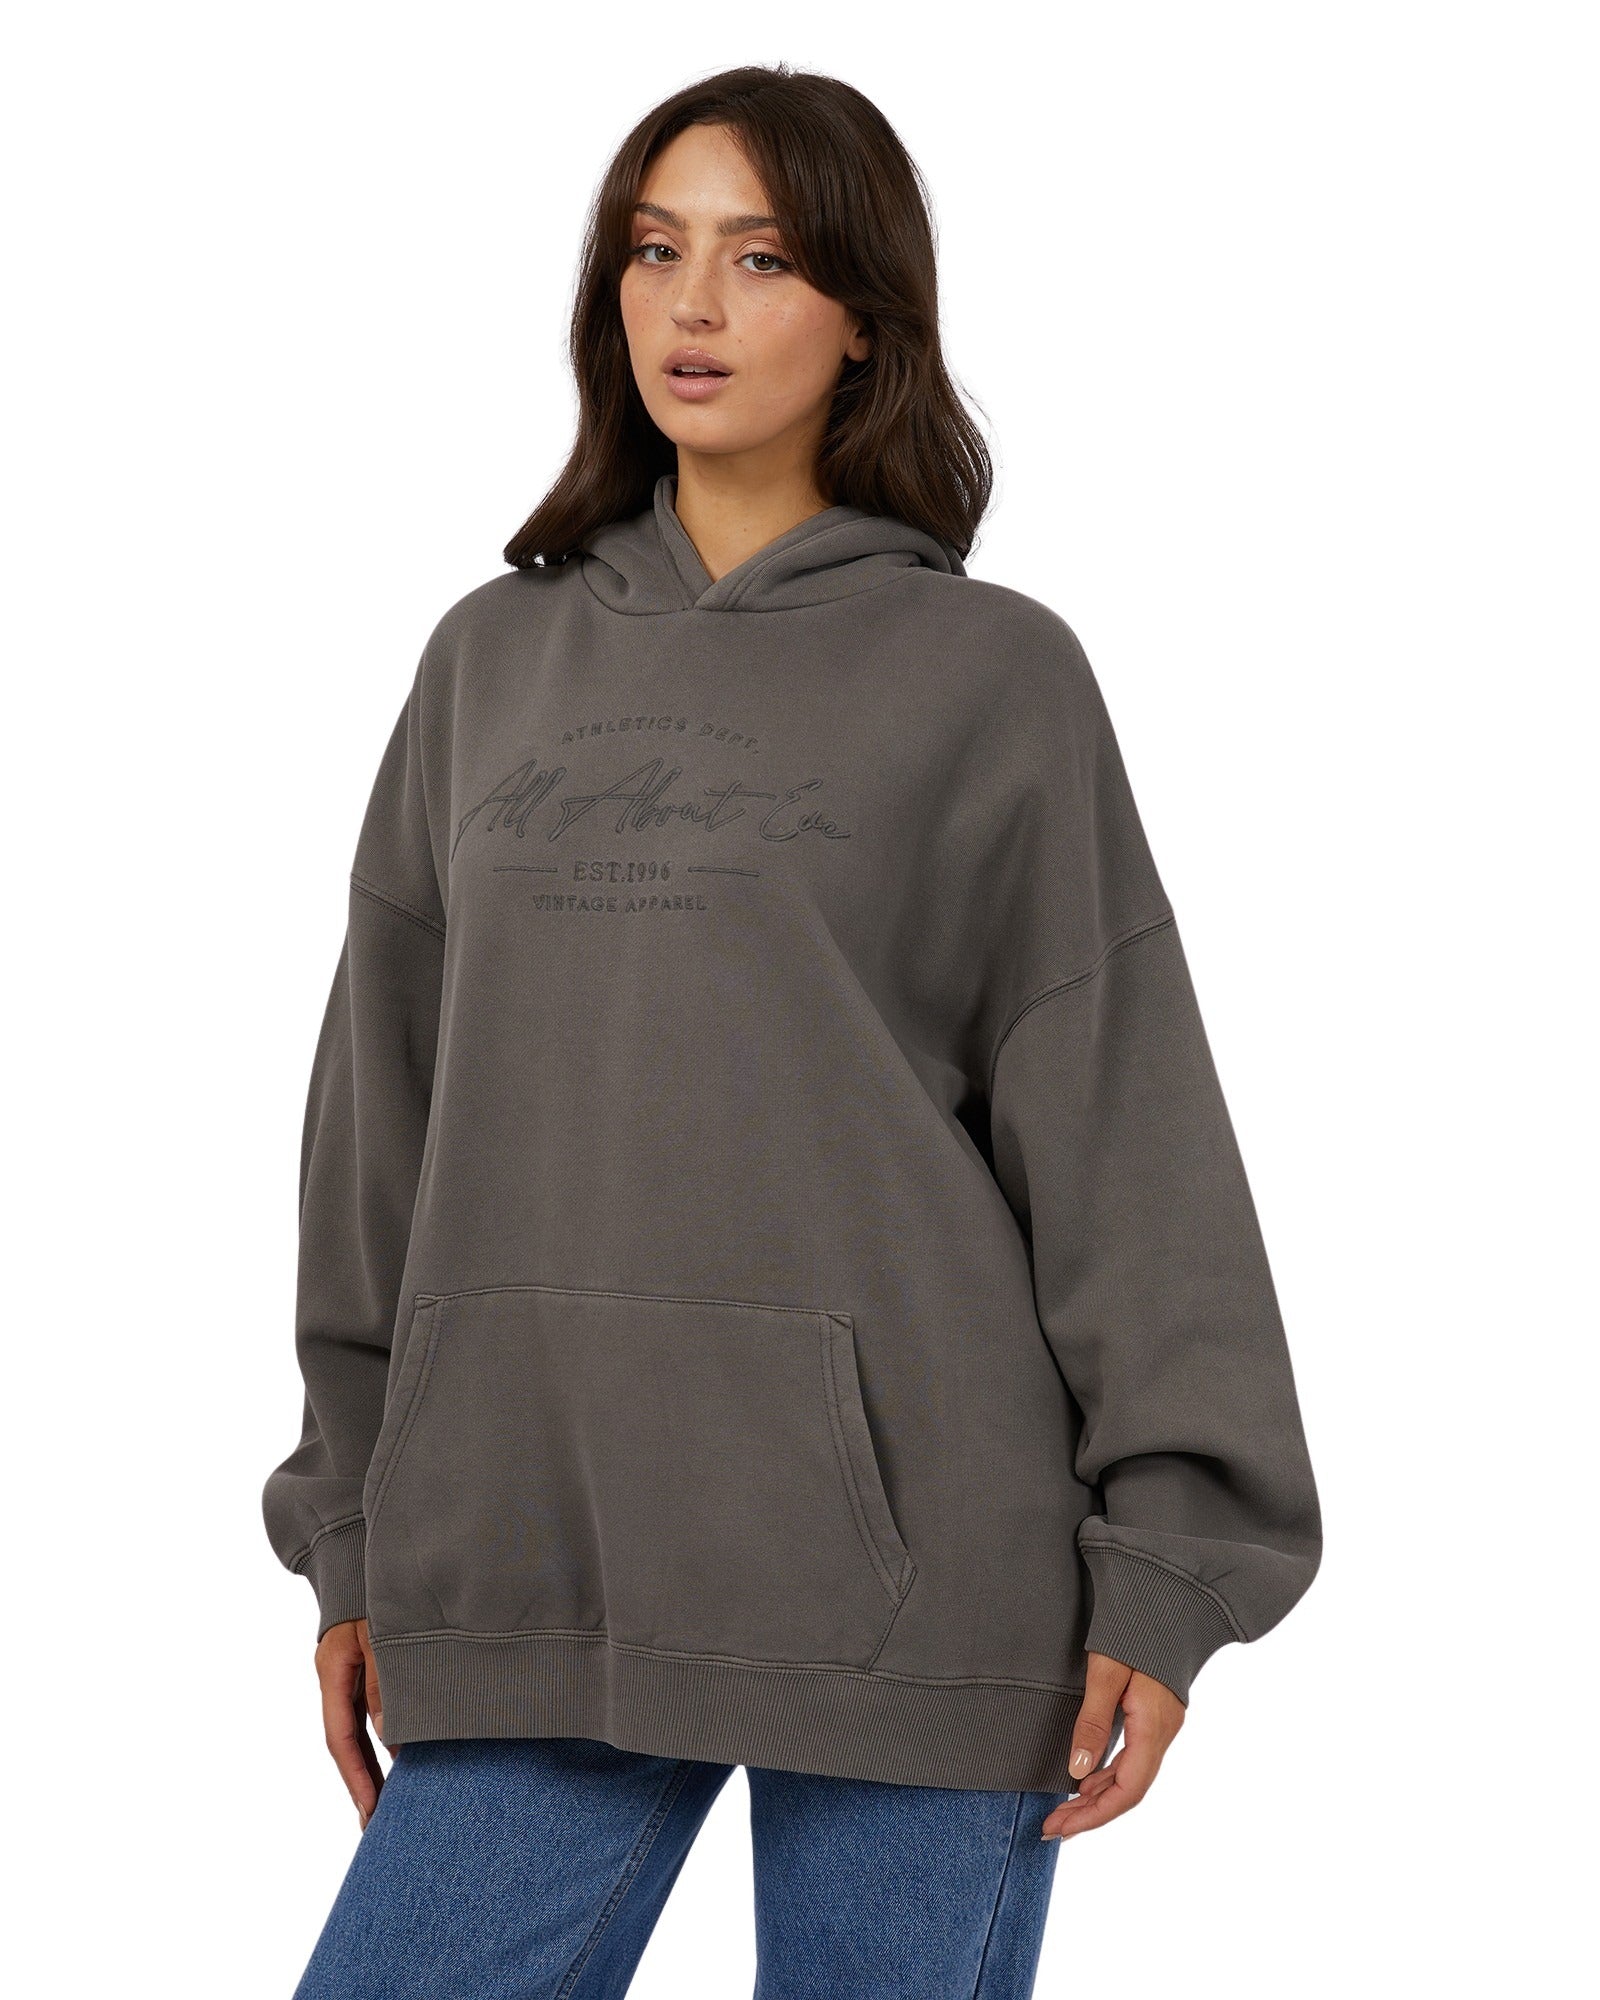 All About Eve - Classic Hoody - Charcoal